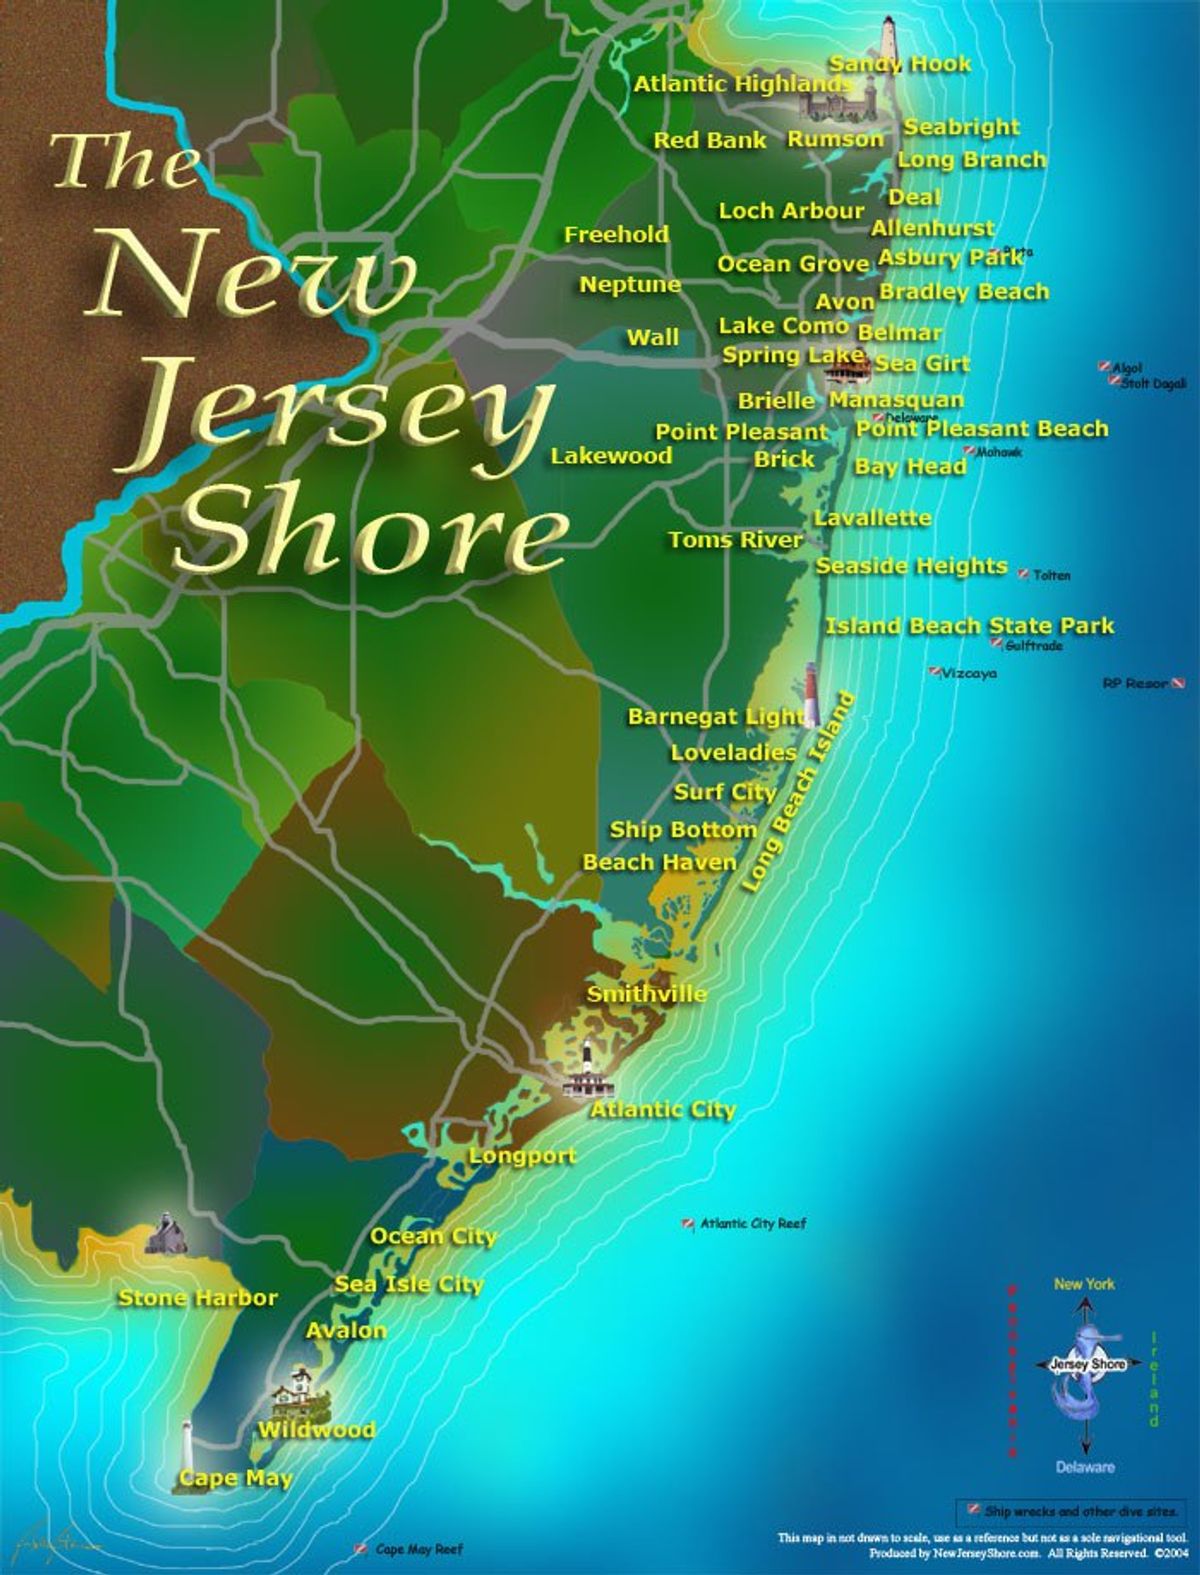 The Top Ten Beaches Of New Jersey